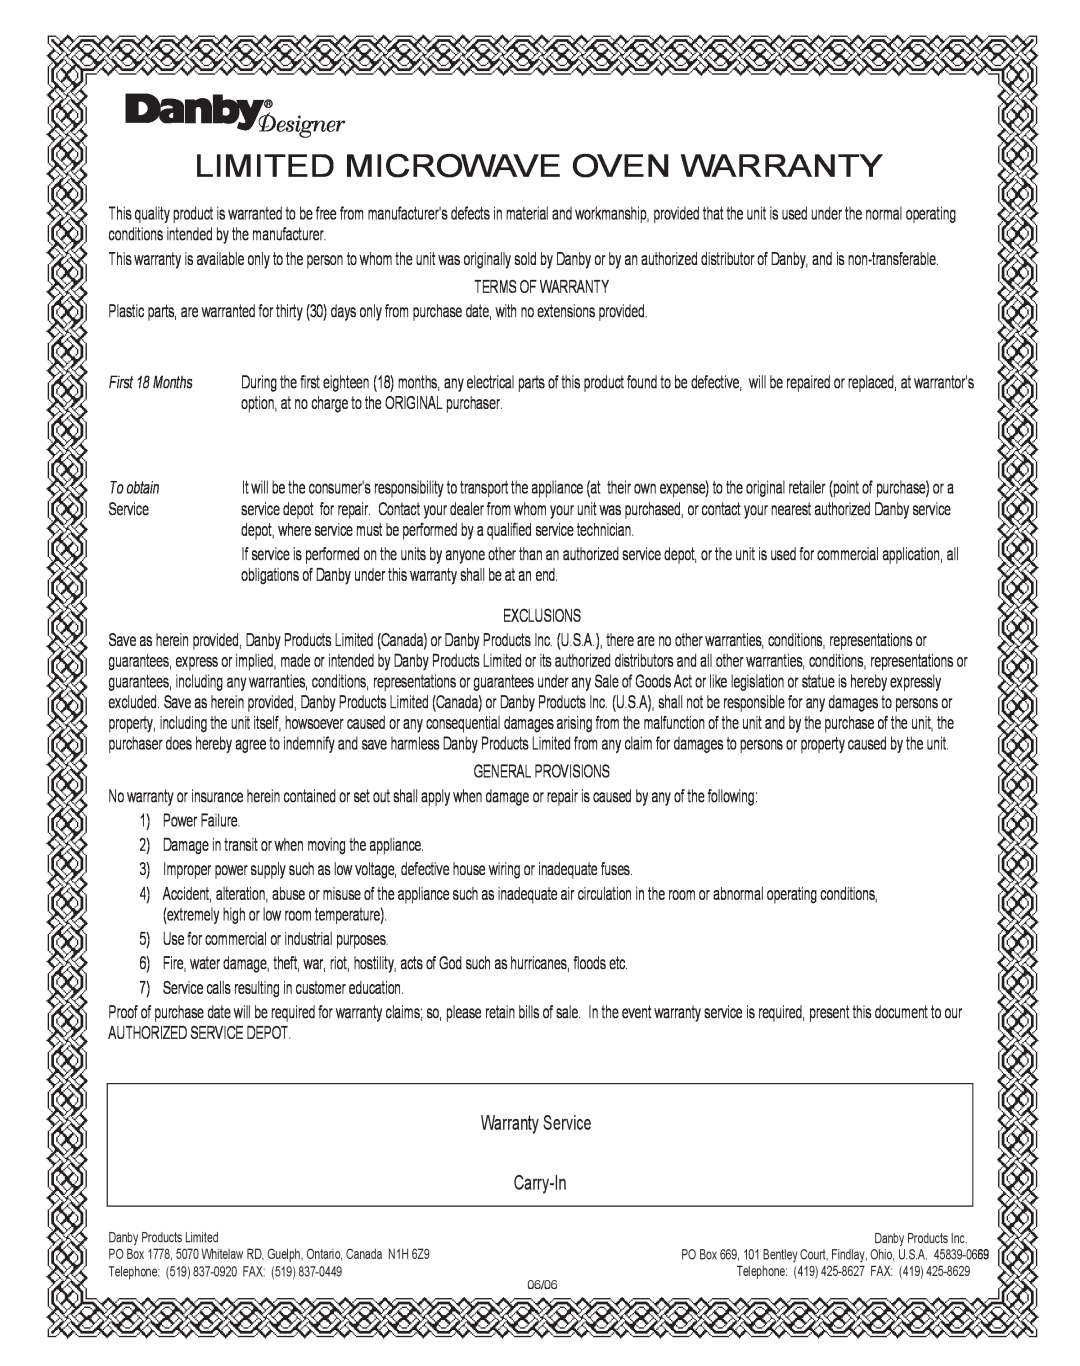 Danby DMW945SS owner manual Limited Microwave Oven Warranty, Warranty Service, Carry-In, First 18 Months, To obtain 